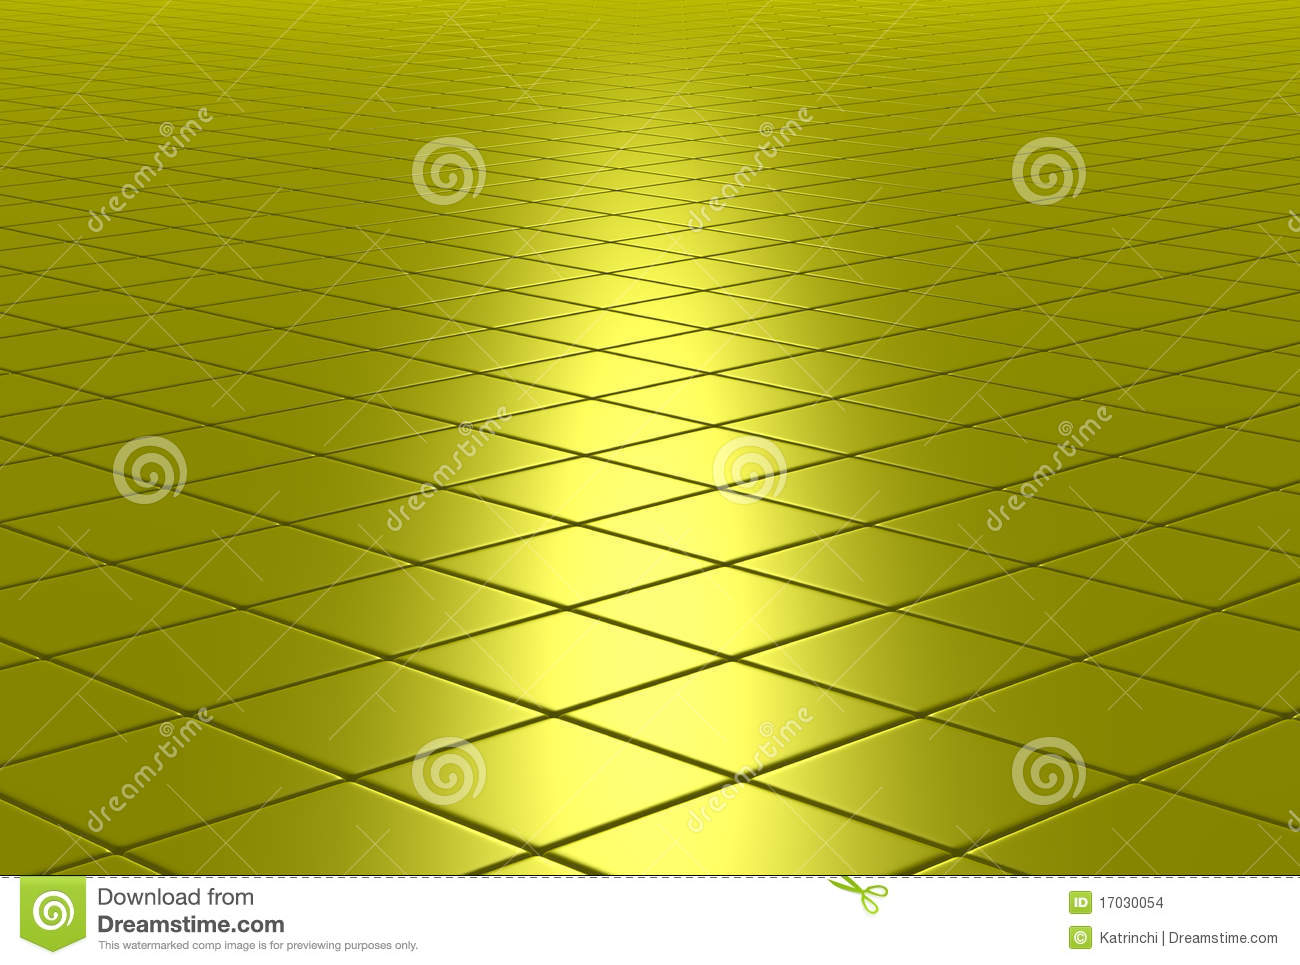 Stock Images  Gold Shiny Tiled Floor